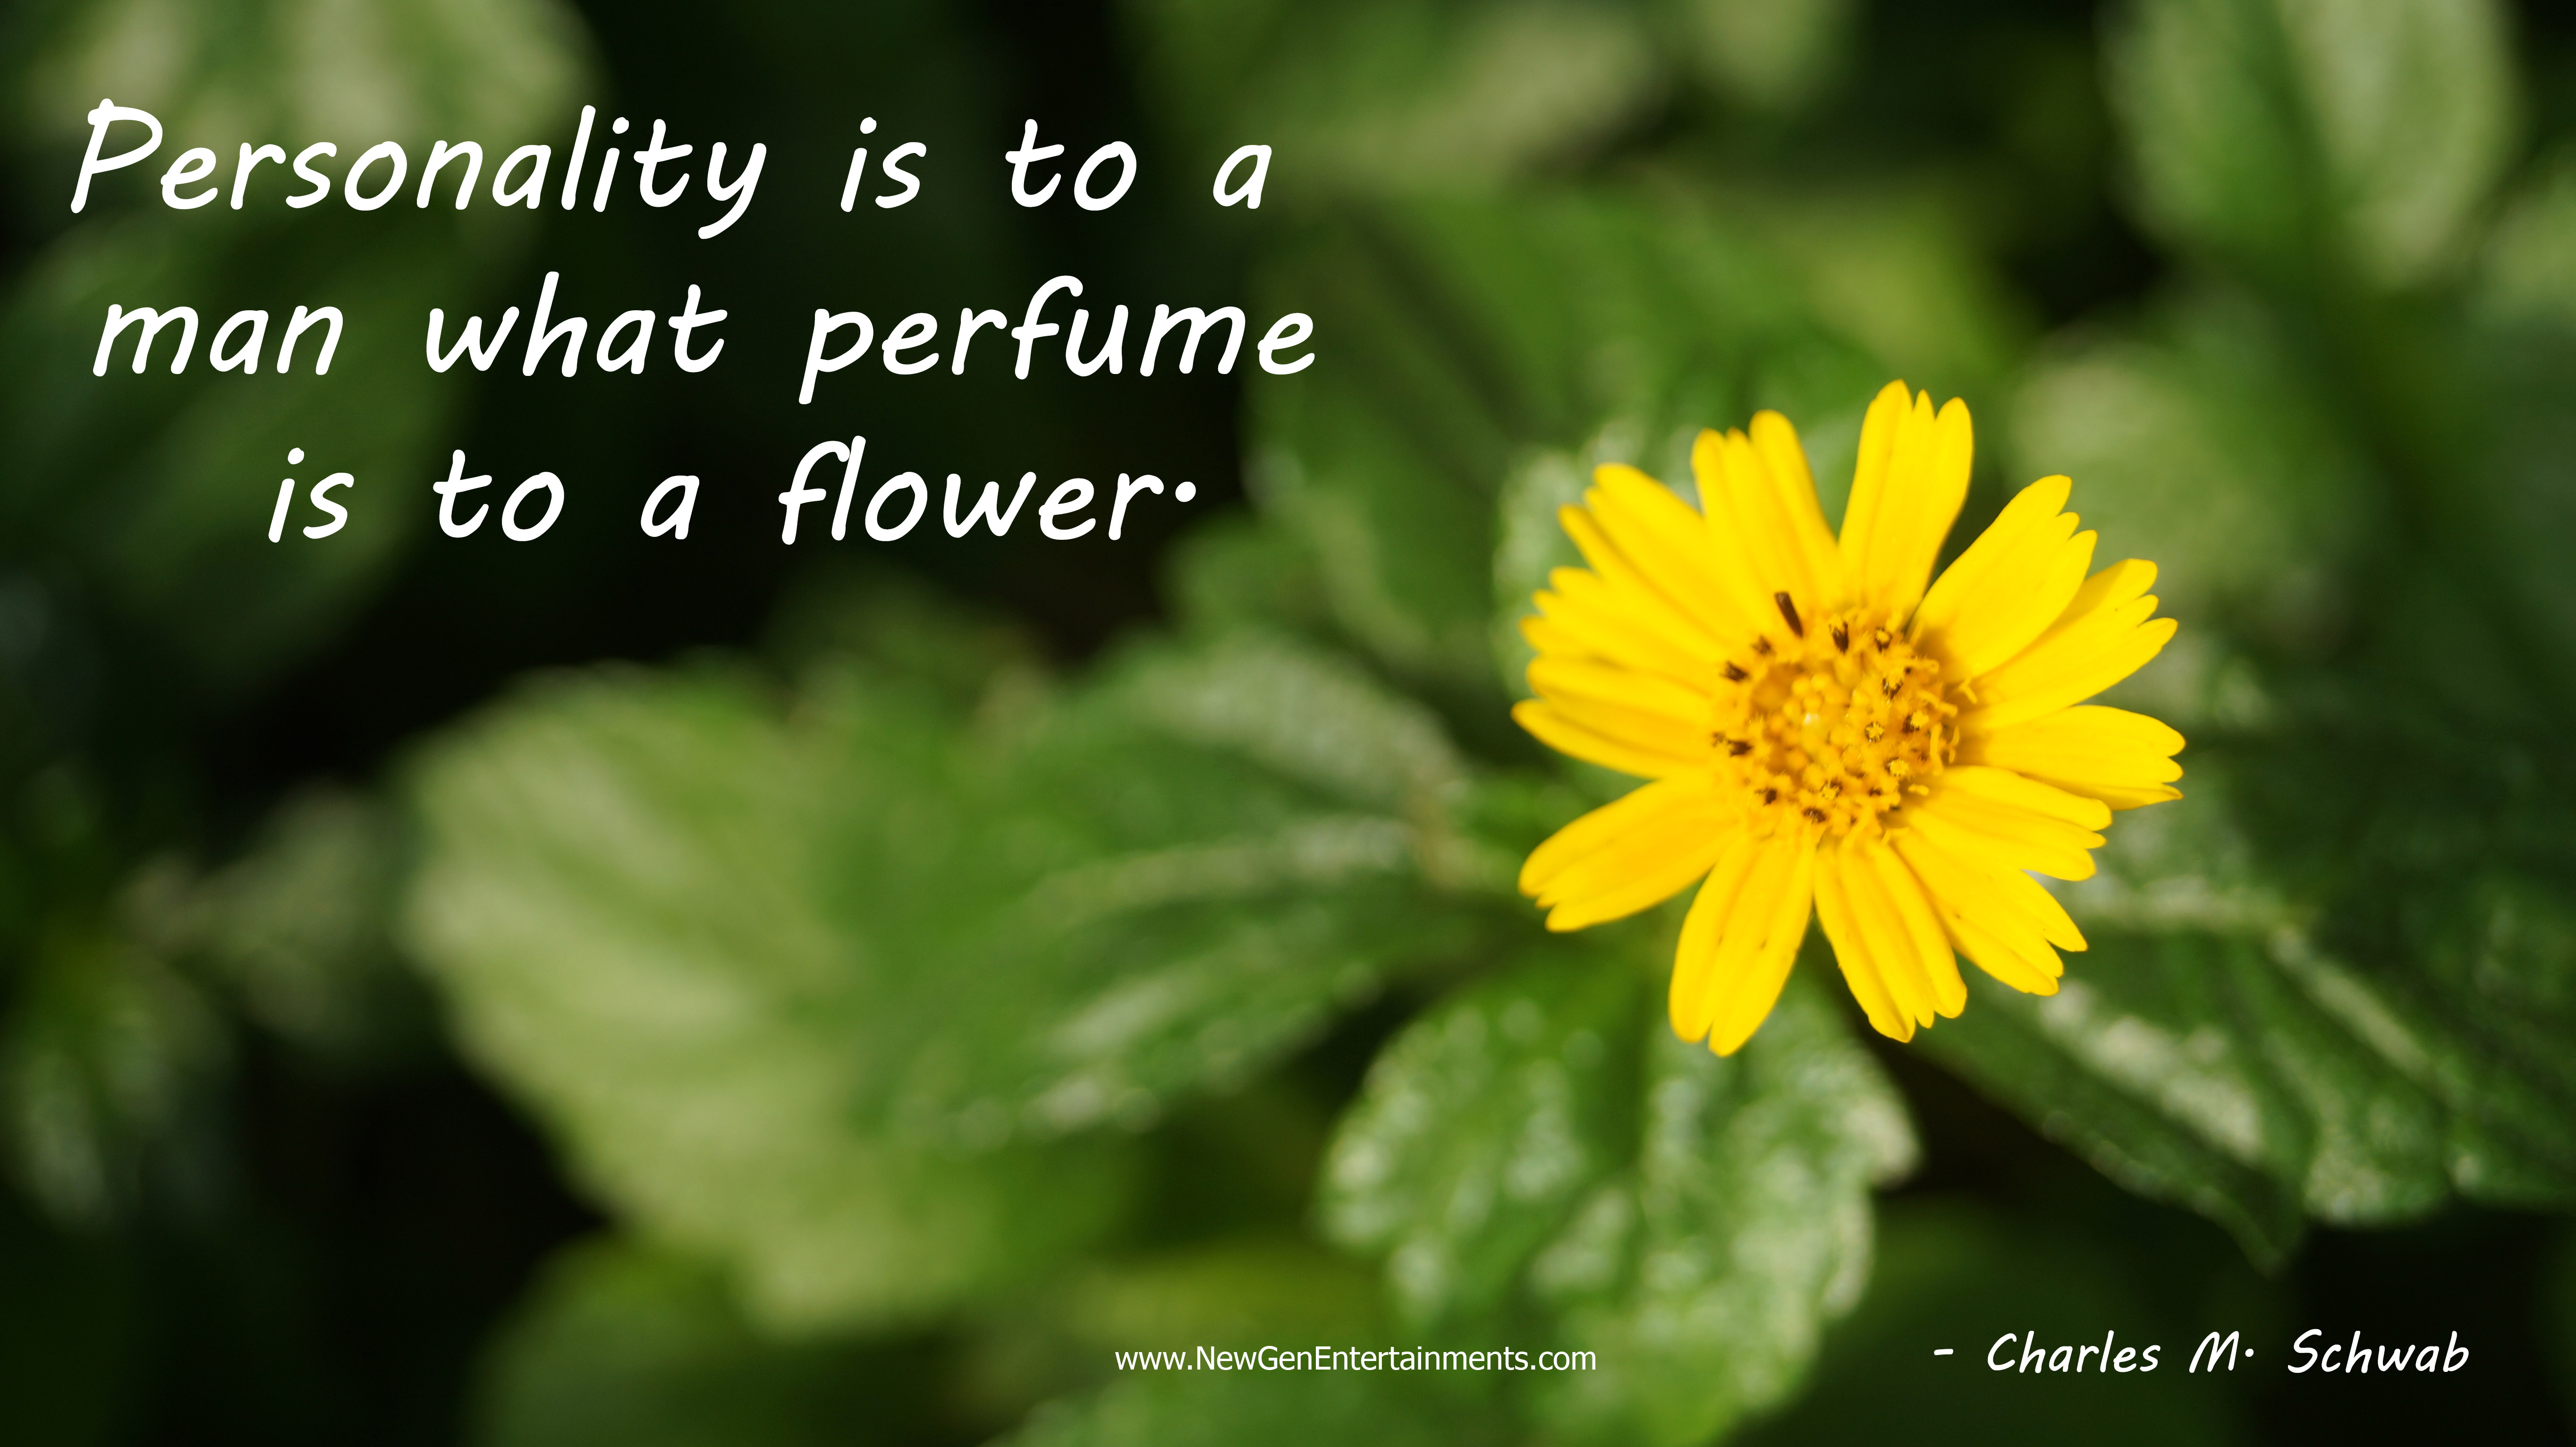 Personality is to a man what perfume is to a flower